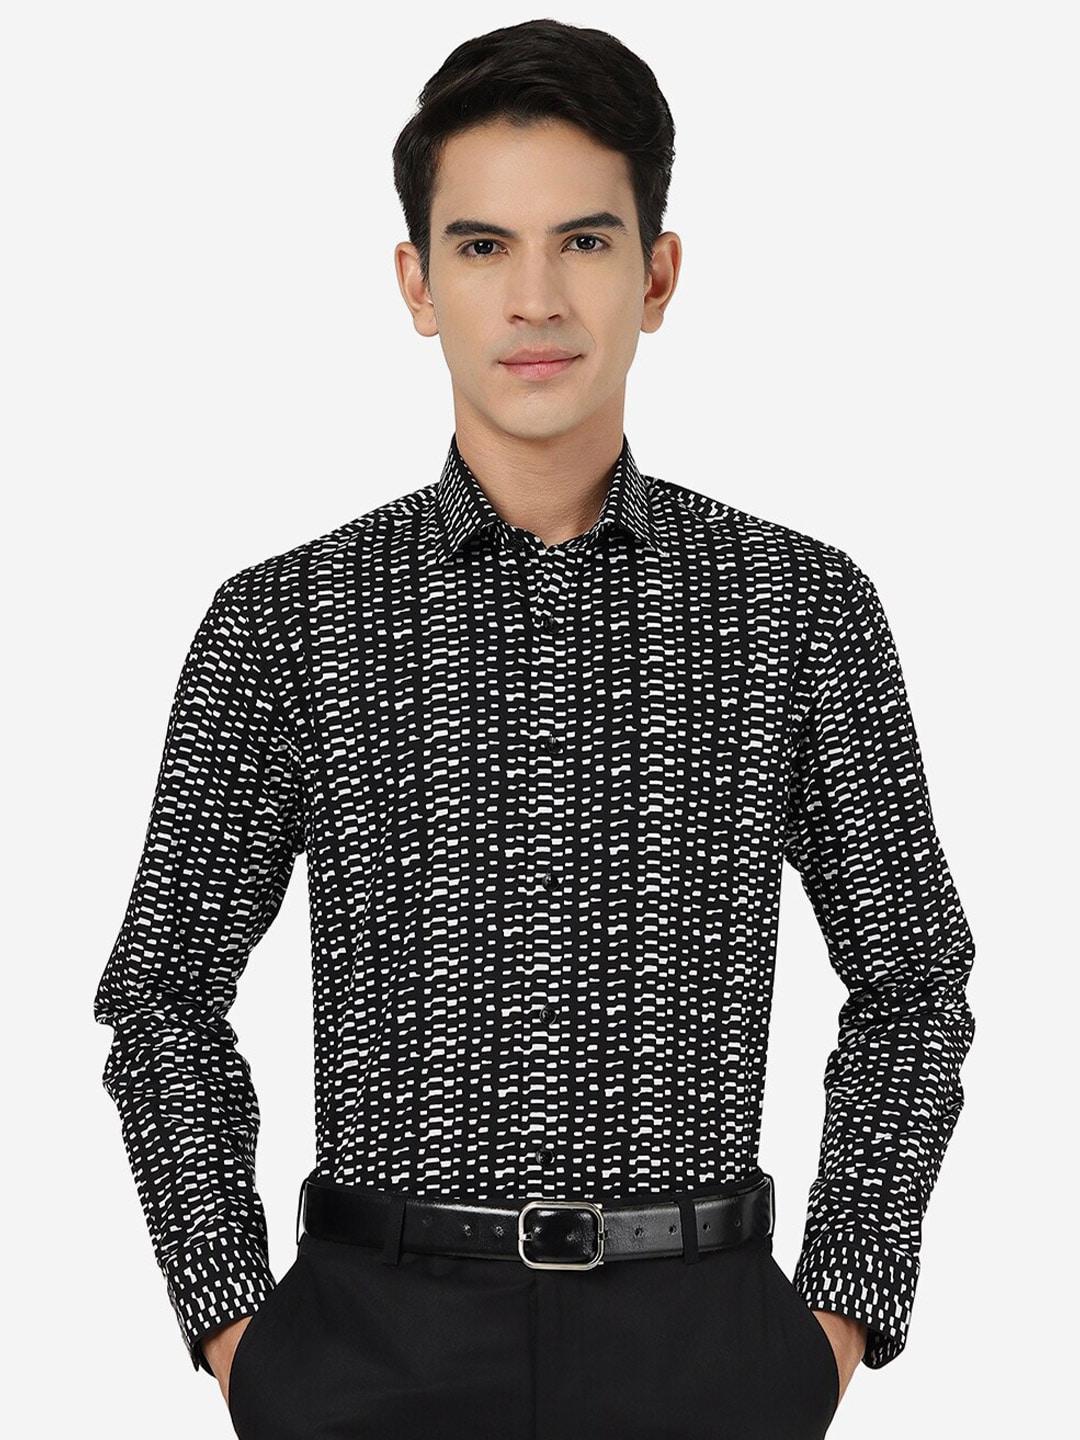 jb studio slim fit abstract printed pure cotton party shirt